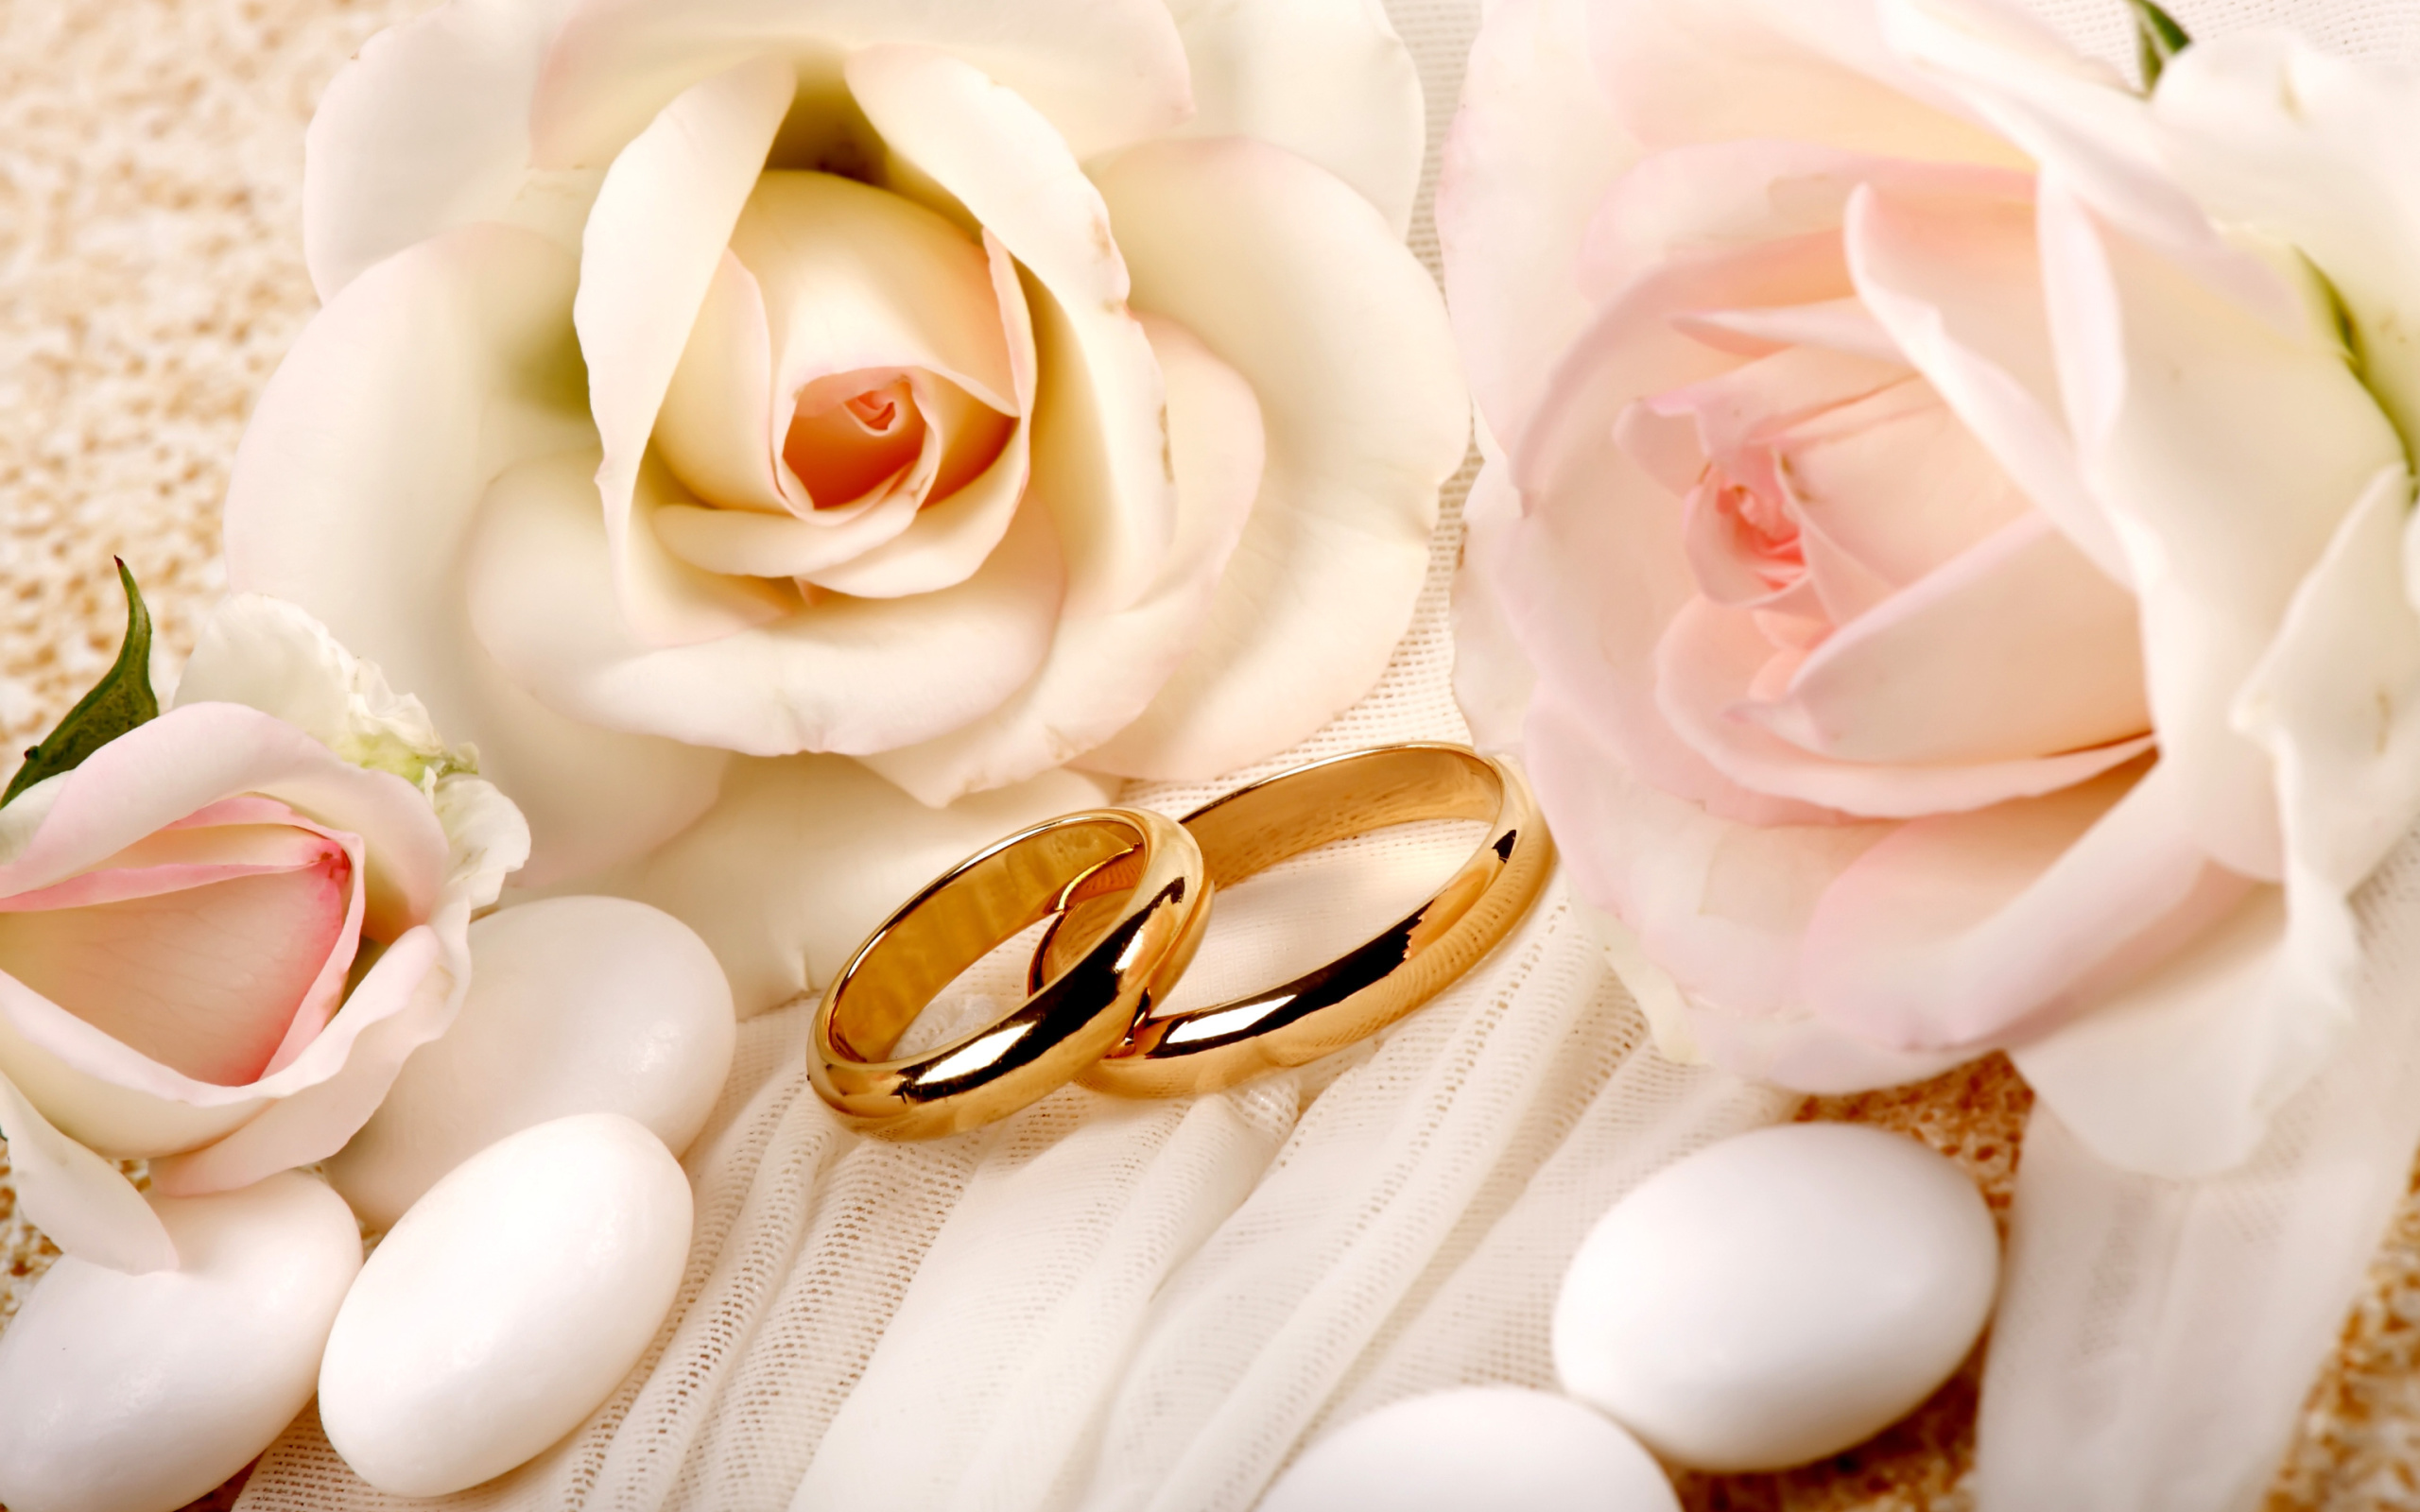 Roses and Wedding Rings wallpaper 2560x1600